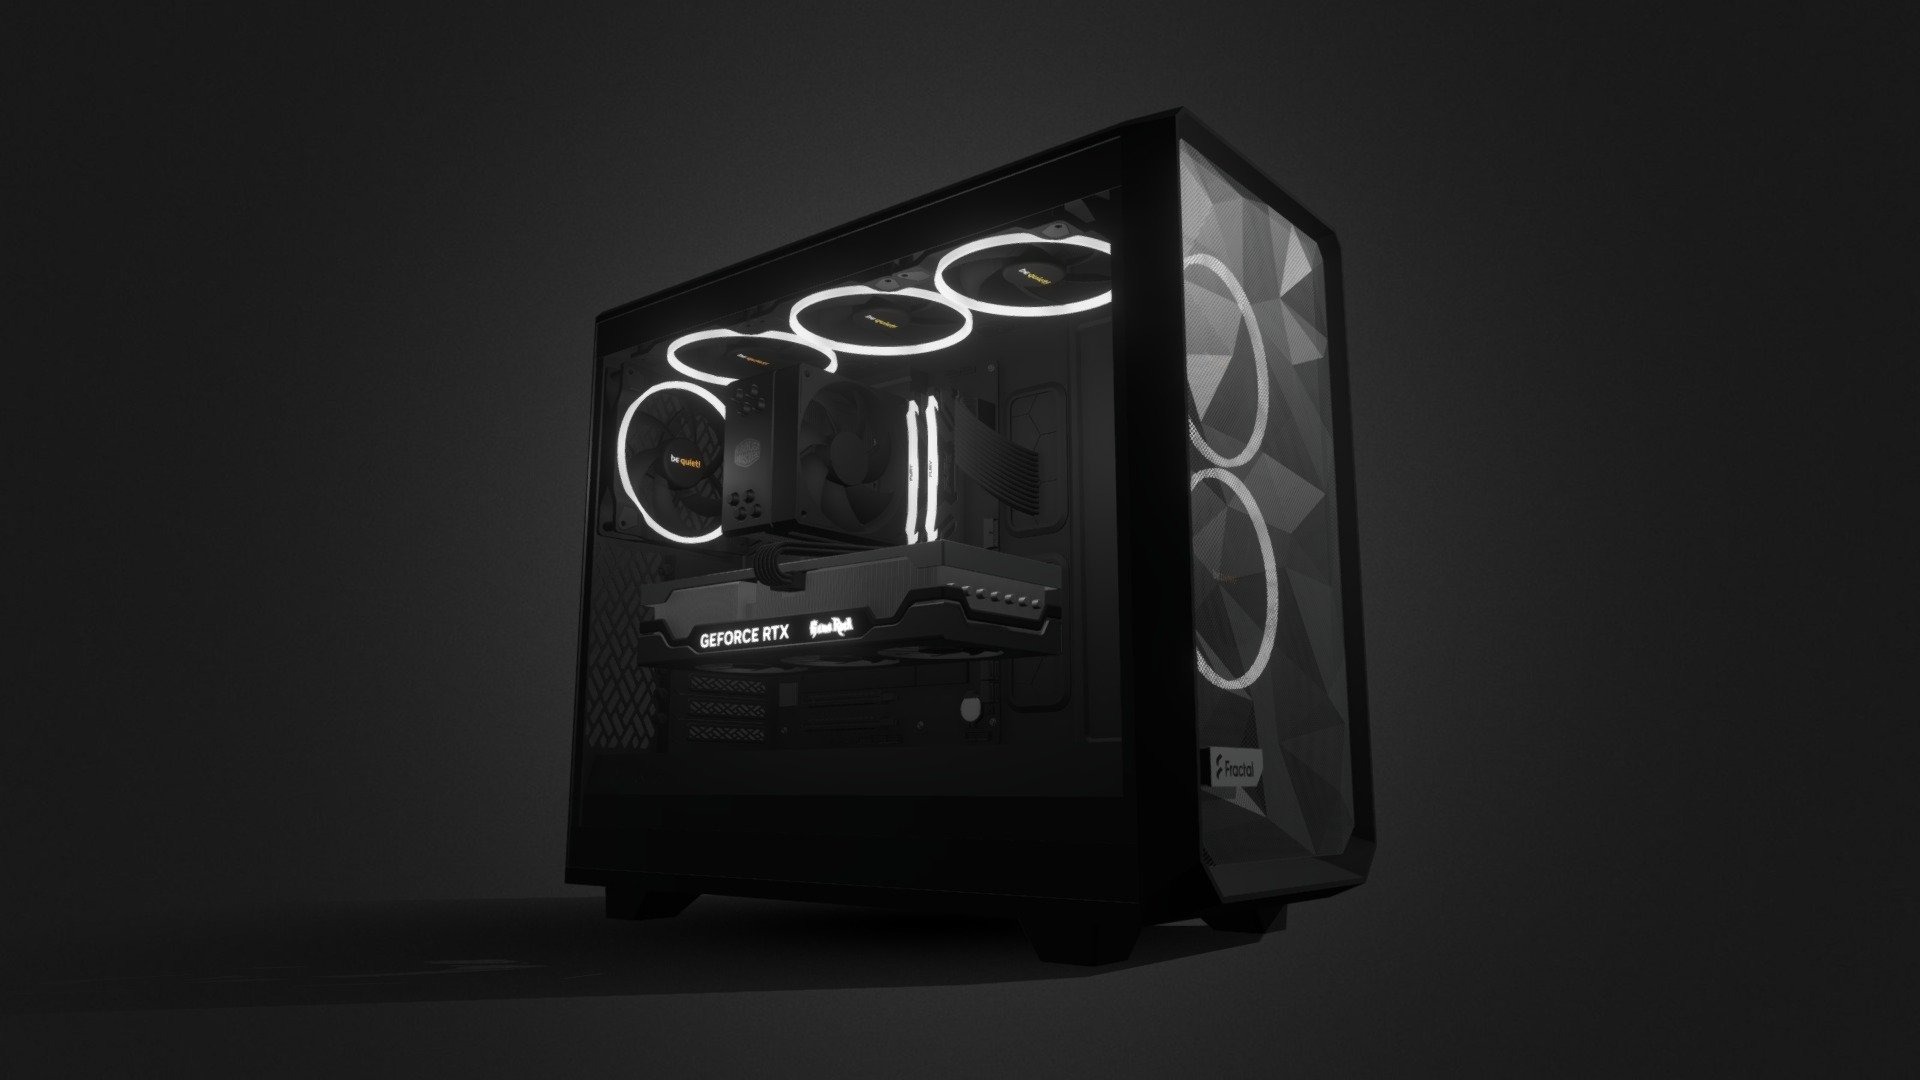 fractal meshify 2 lite

z790 aorus elite ax

kingston fury renegade ddr5

coolermaster 212 evo

palit gamerock 4070ti

bequet! 140mm lightwings

modelled in fusion 360, dimensions are 99% accurate
if someone need something write a pm - Fractal Meshify 2 - 3D model by erfet 3d model